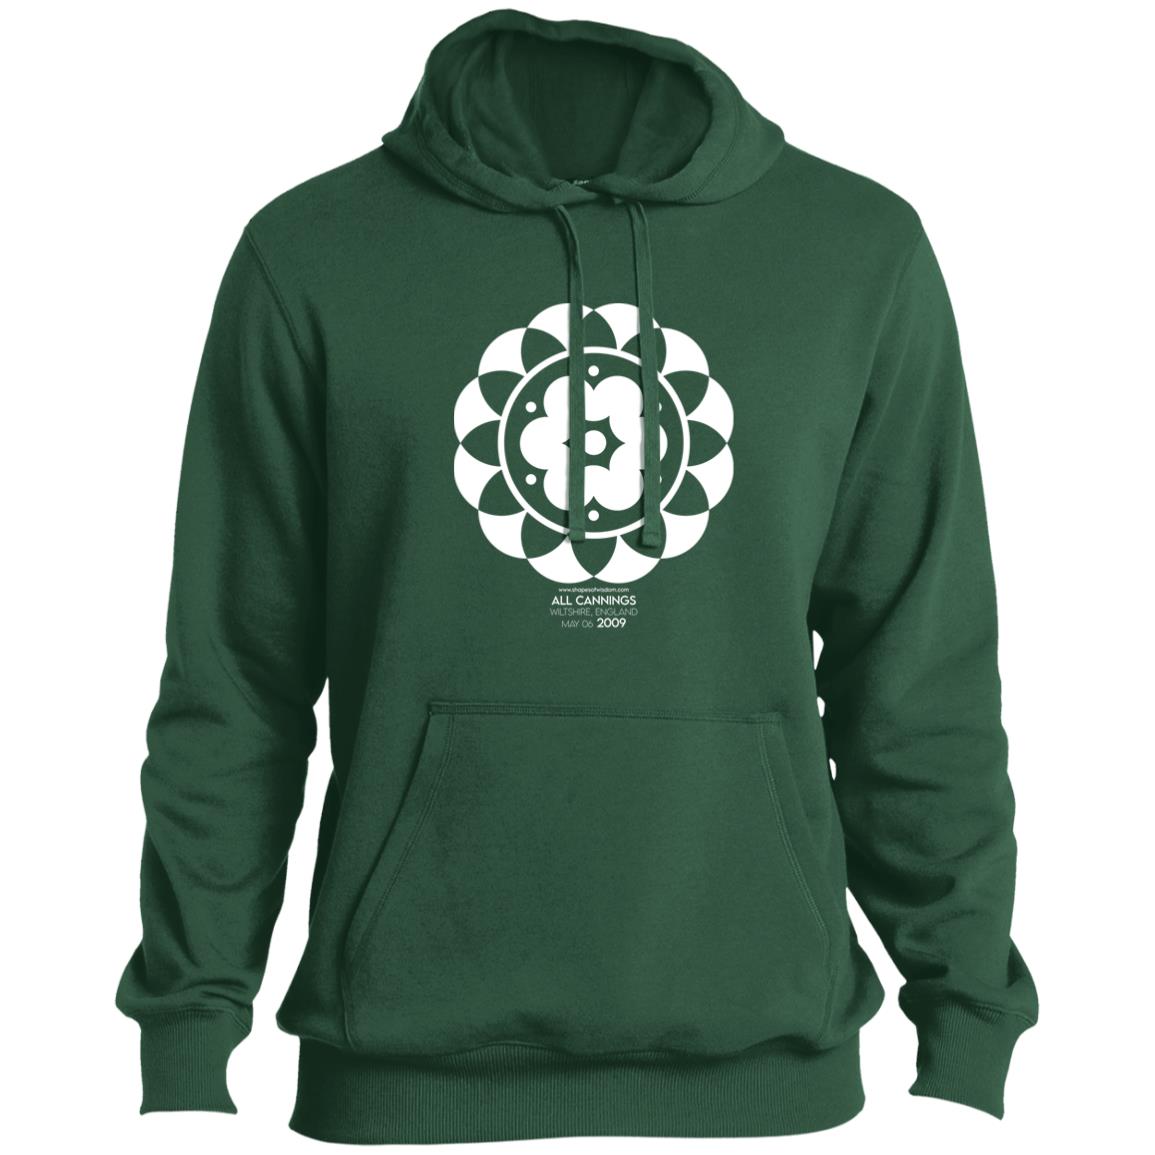 Crop Circle Pullover Hoodie - All Cannings 3